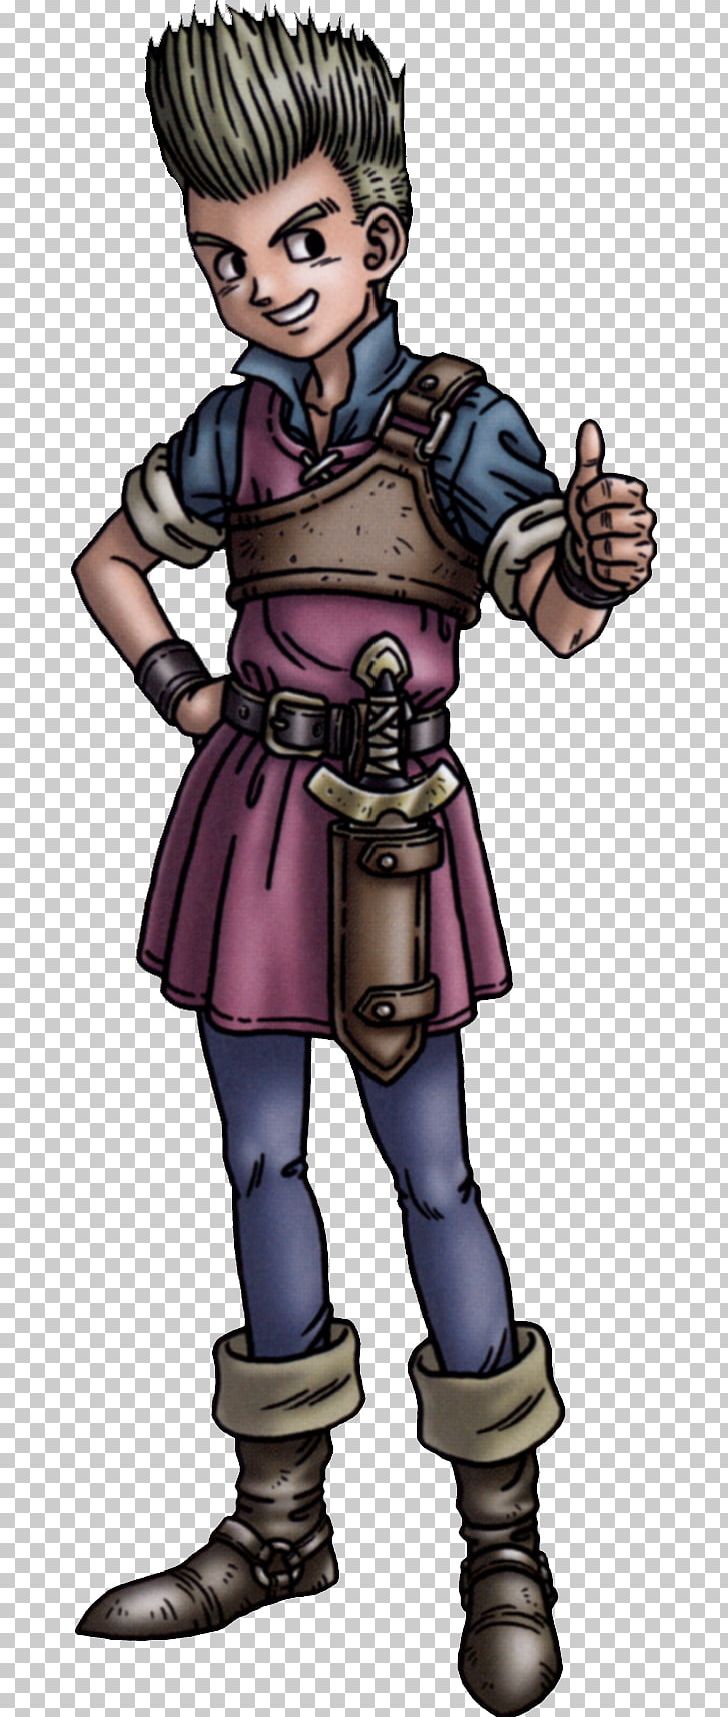 Dragon Quest IX Dragon Quest Monsters: Terry No Wonderland 3D Dragon Quest X Dragon Quest VIII Dragon Warrior Monsters 2 PNG, Clipart, Cartoon, Costume Design, Dragon Quest, Dragon Quest Ix, Dragon Quest Monsters Free PNG Download